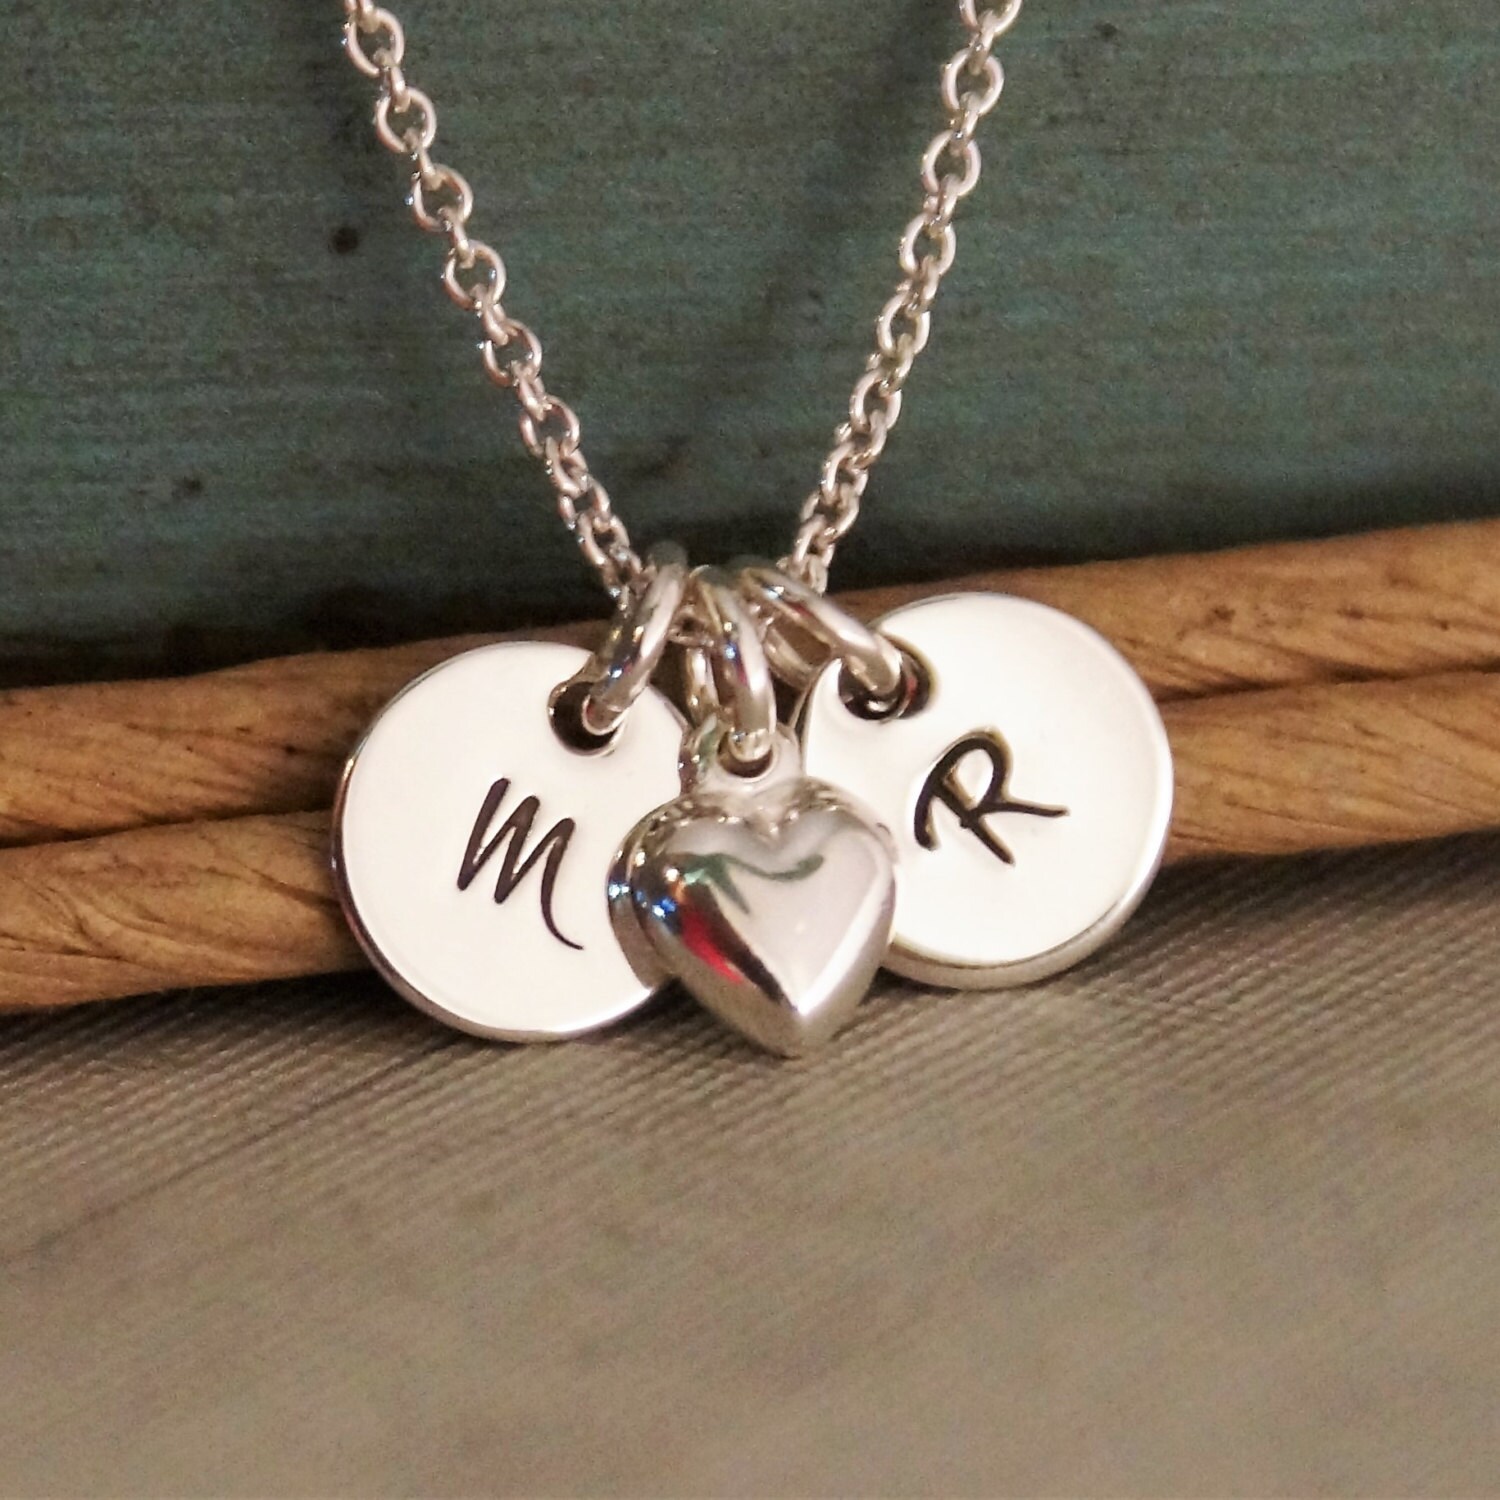 Hand Stamped Jewelry Personalized Sterling Silver Necklace